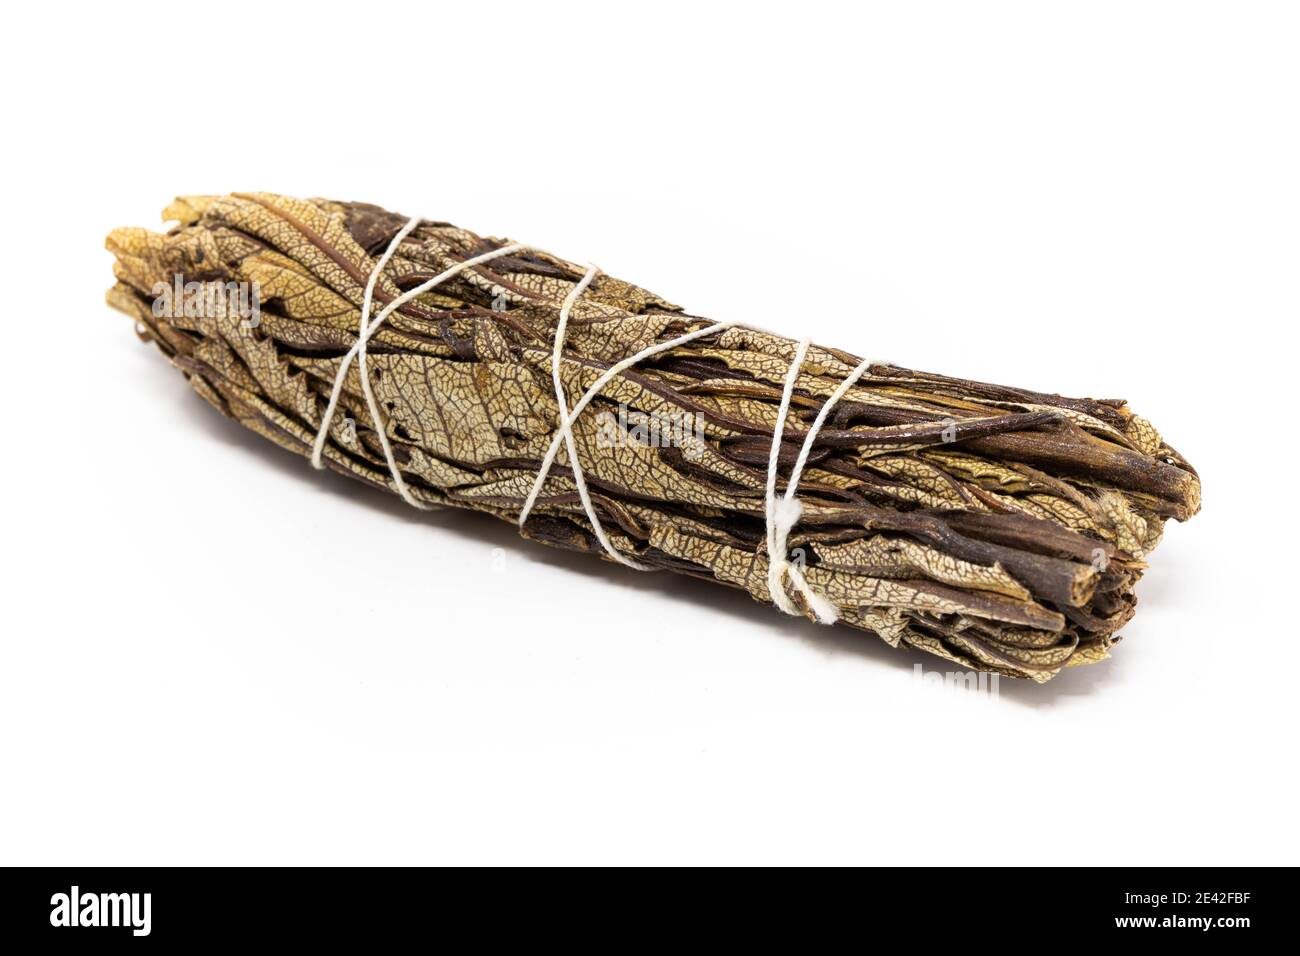 Yerba Santa Sage Smudge Sticks for purification and relaxation close up Stock Photo